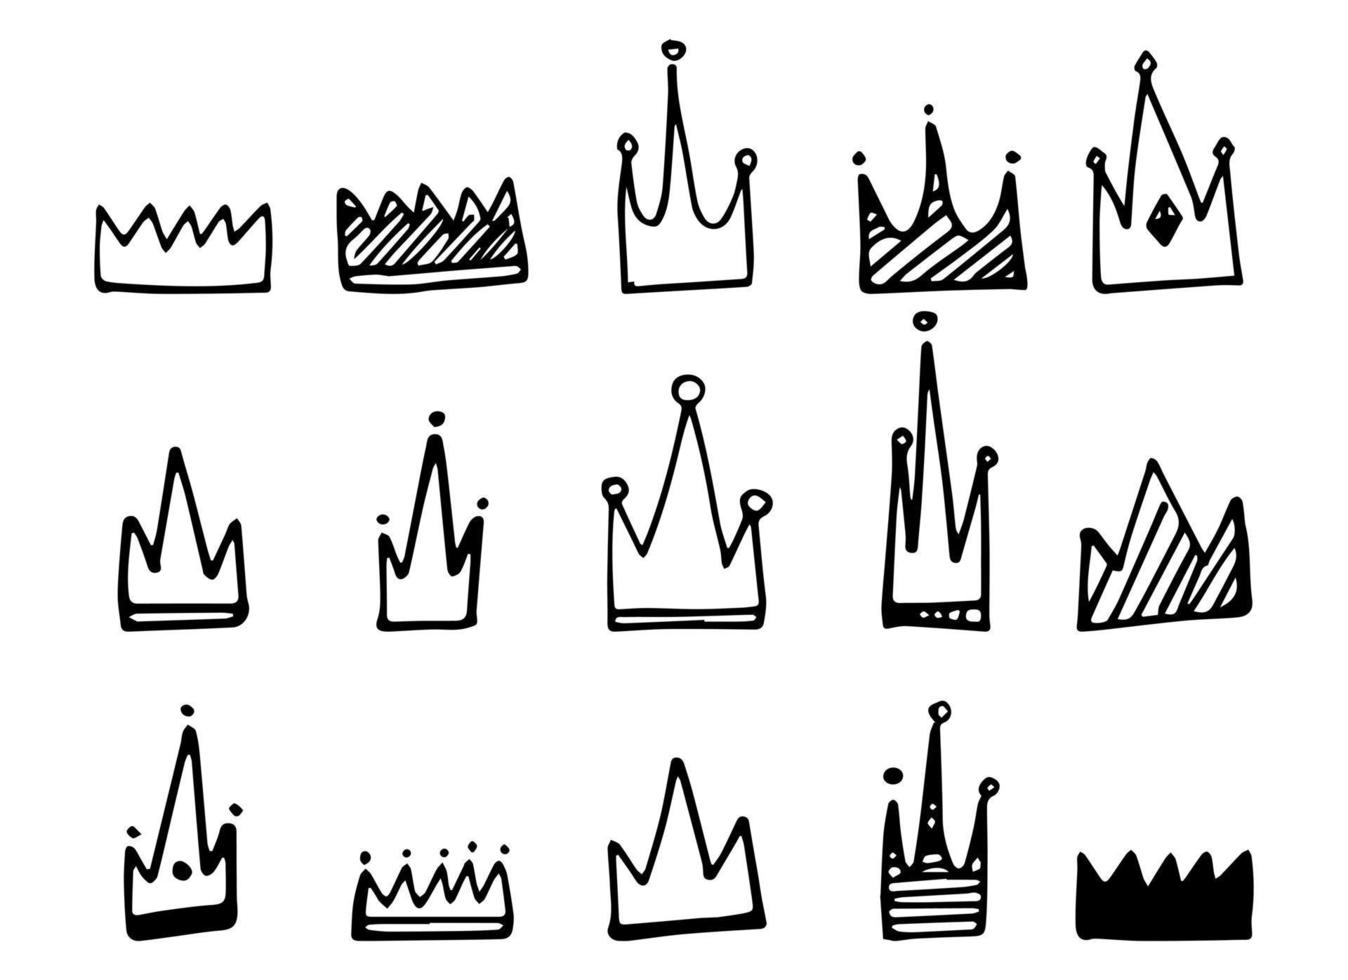 crown vector design illustration isolated on white background